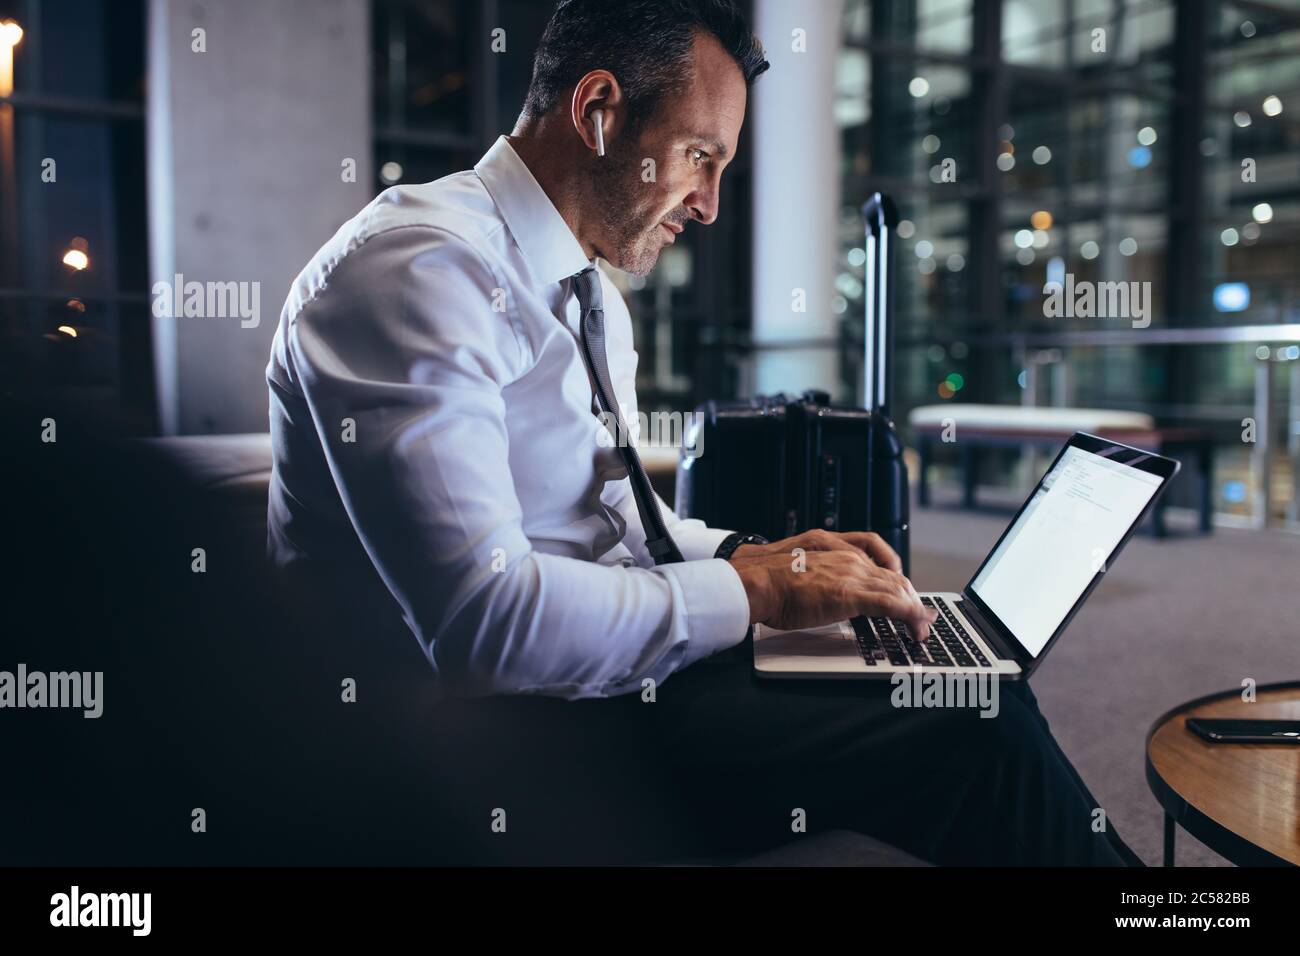 Businessman working on laptop while waiting for his flight at airport. Man in formalwear using laptop computer at airport waiting area. Stock Photo